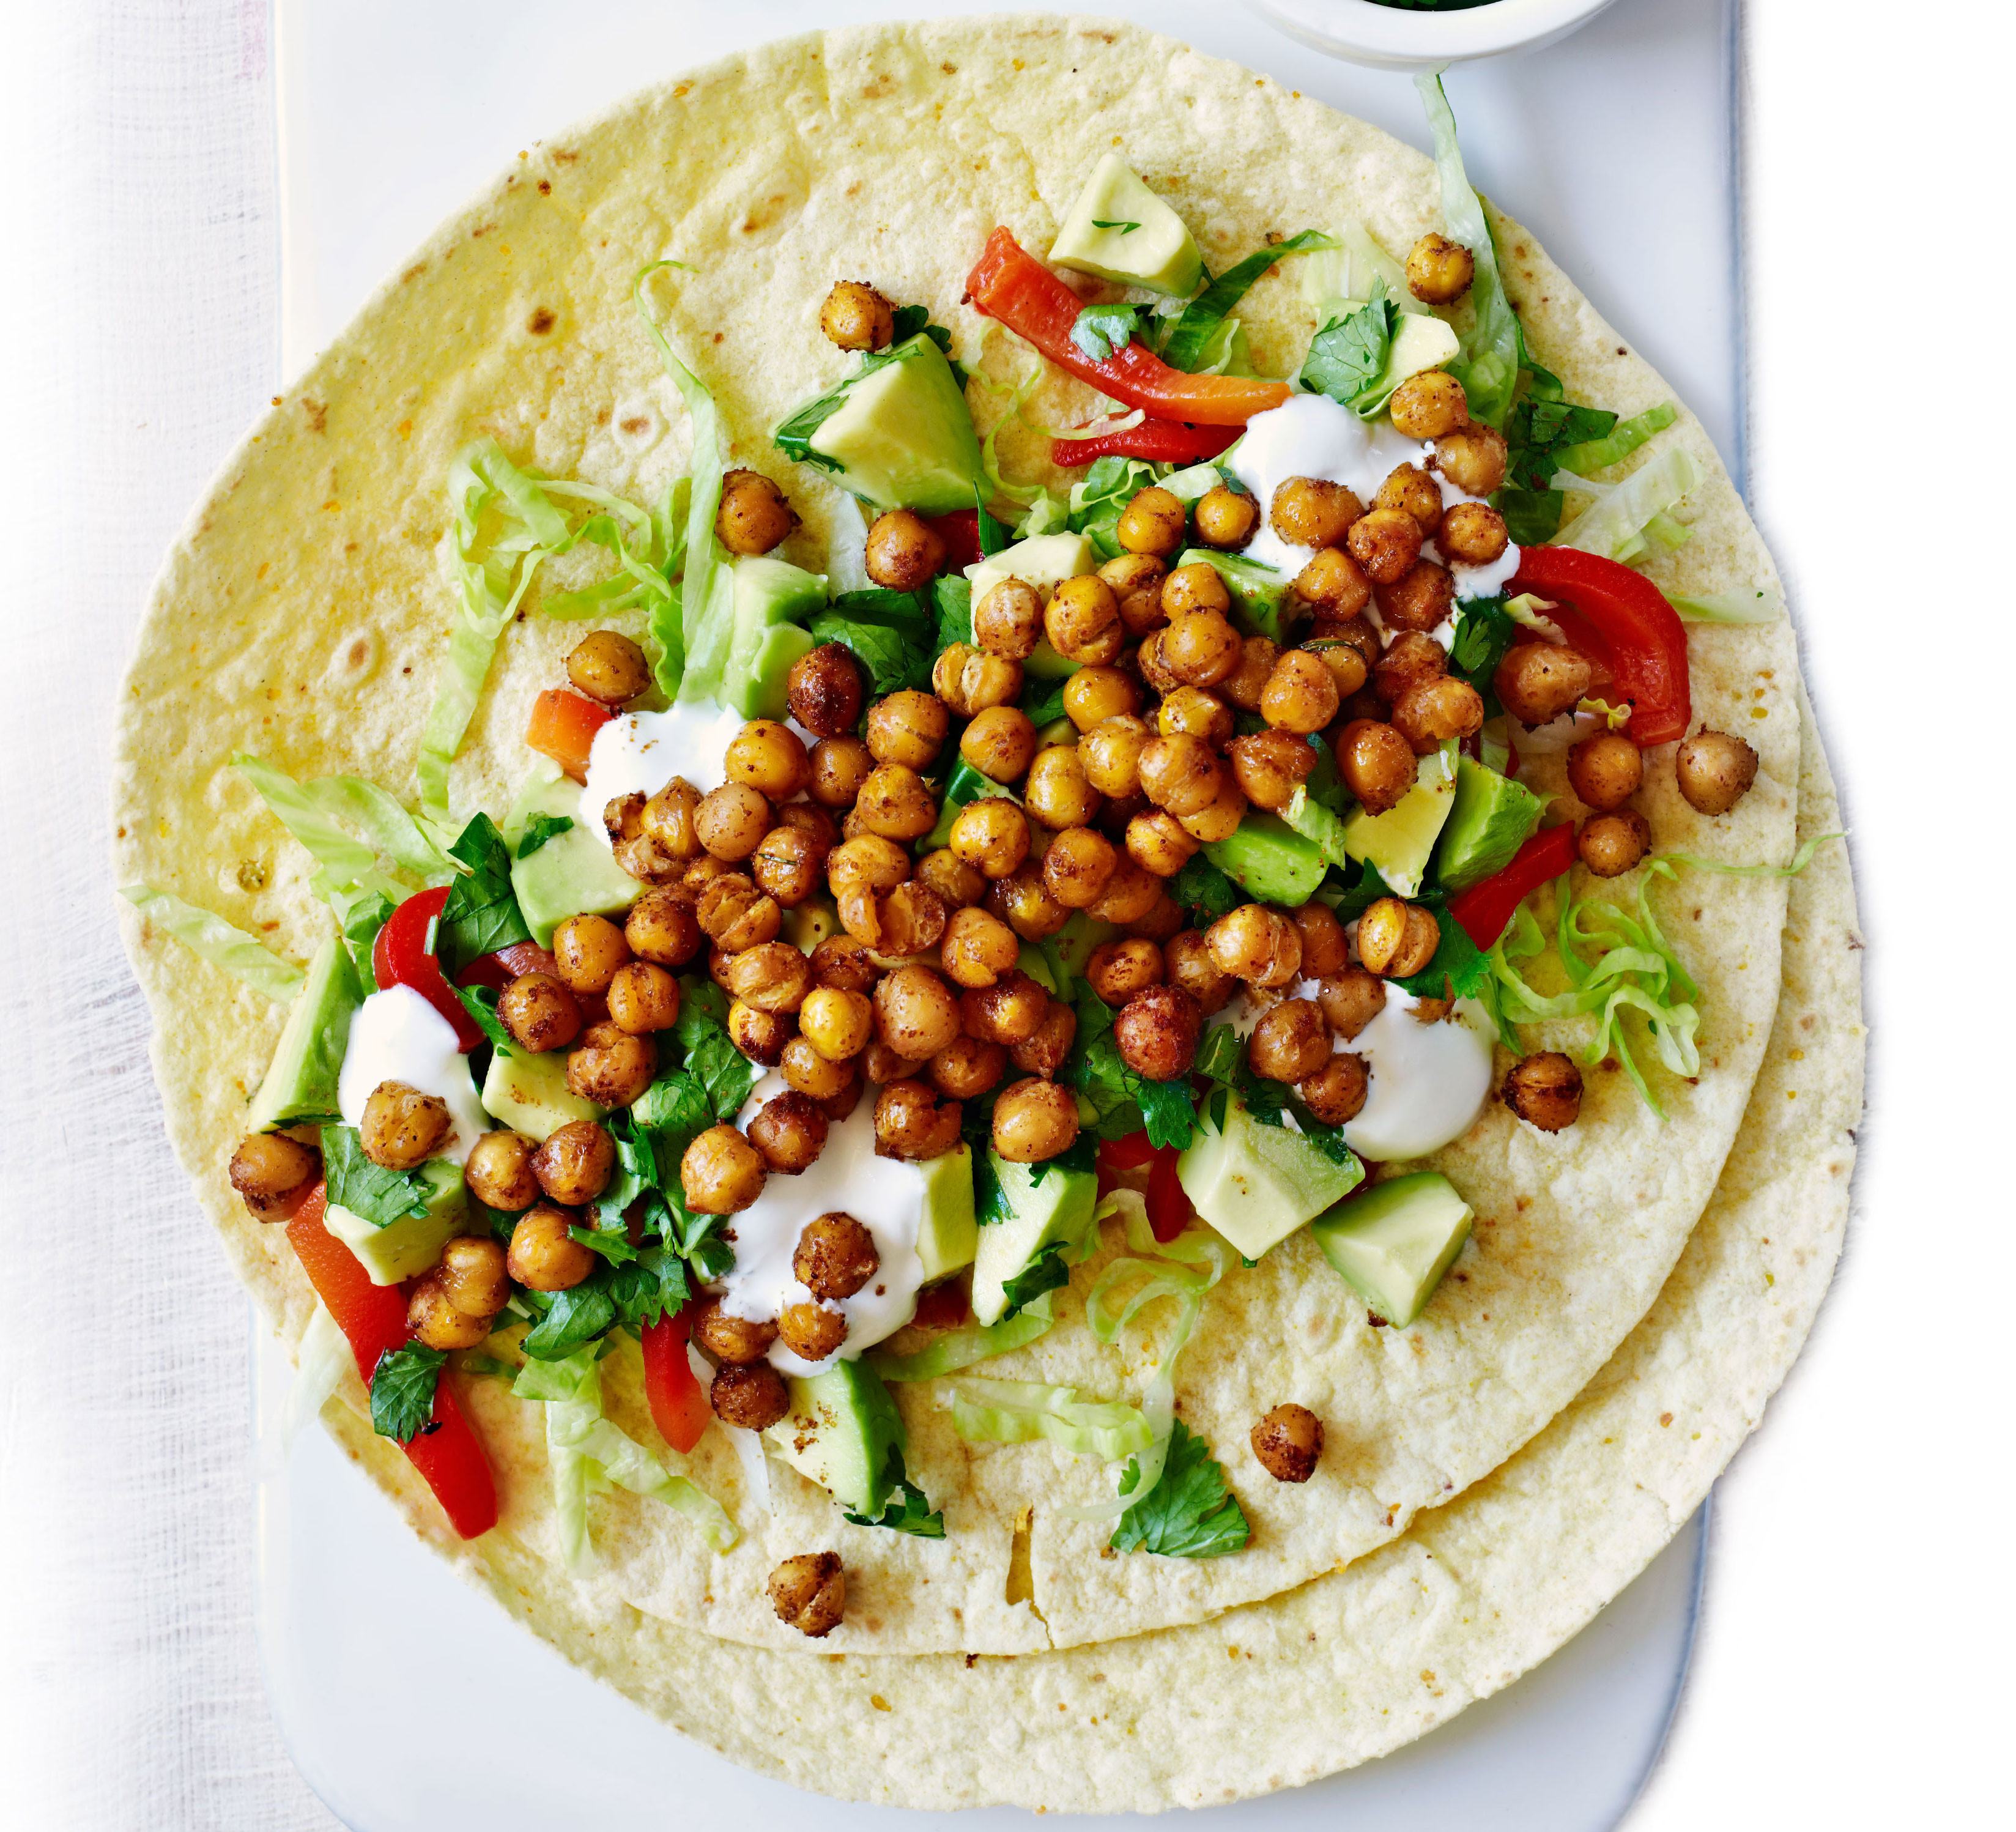 Healthy Chickpea Recipes
 Roasted chickpea wraps